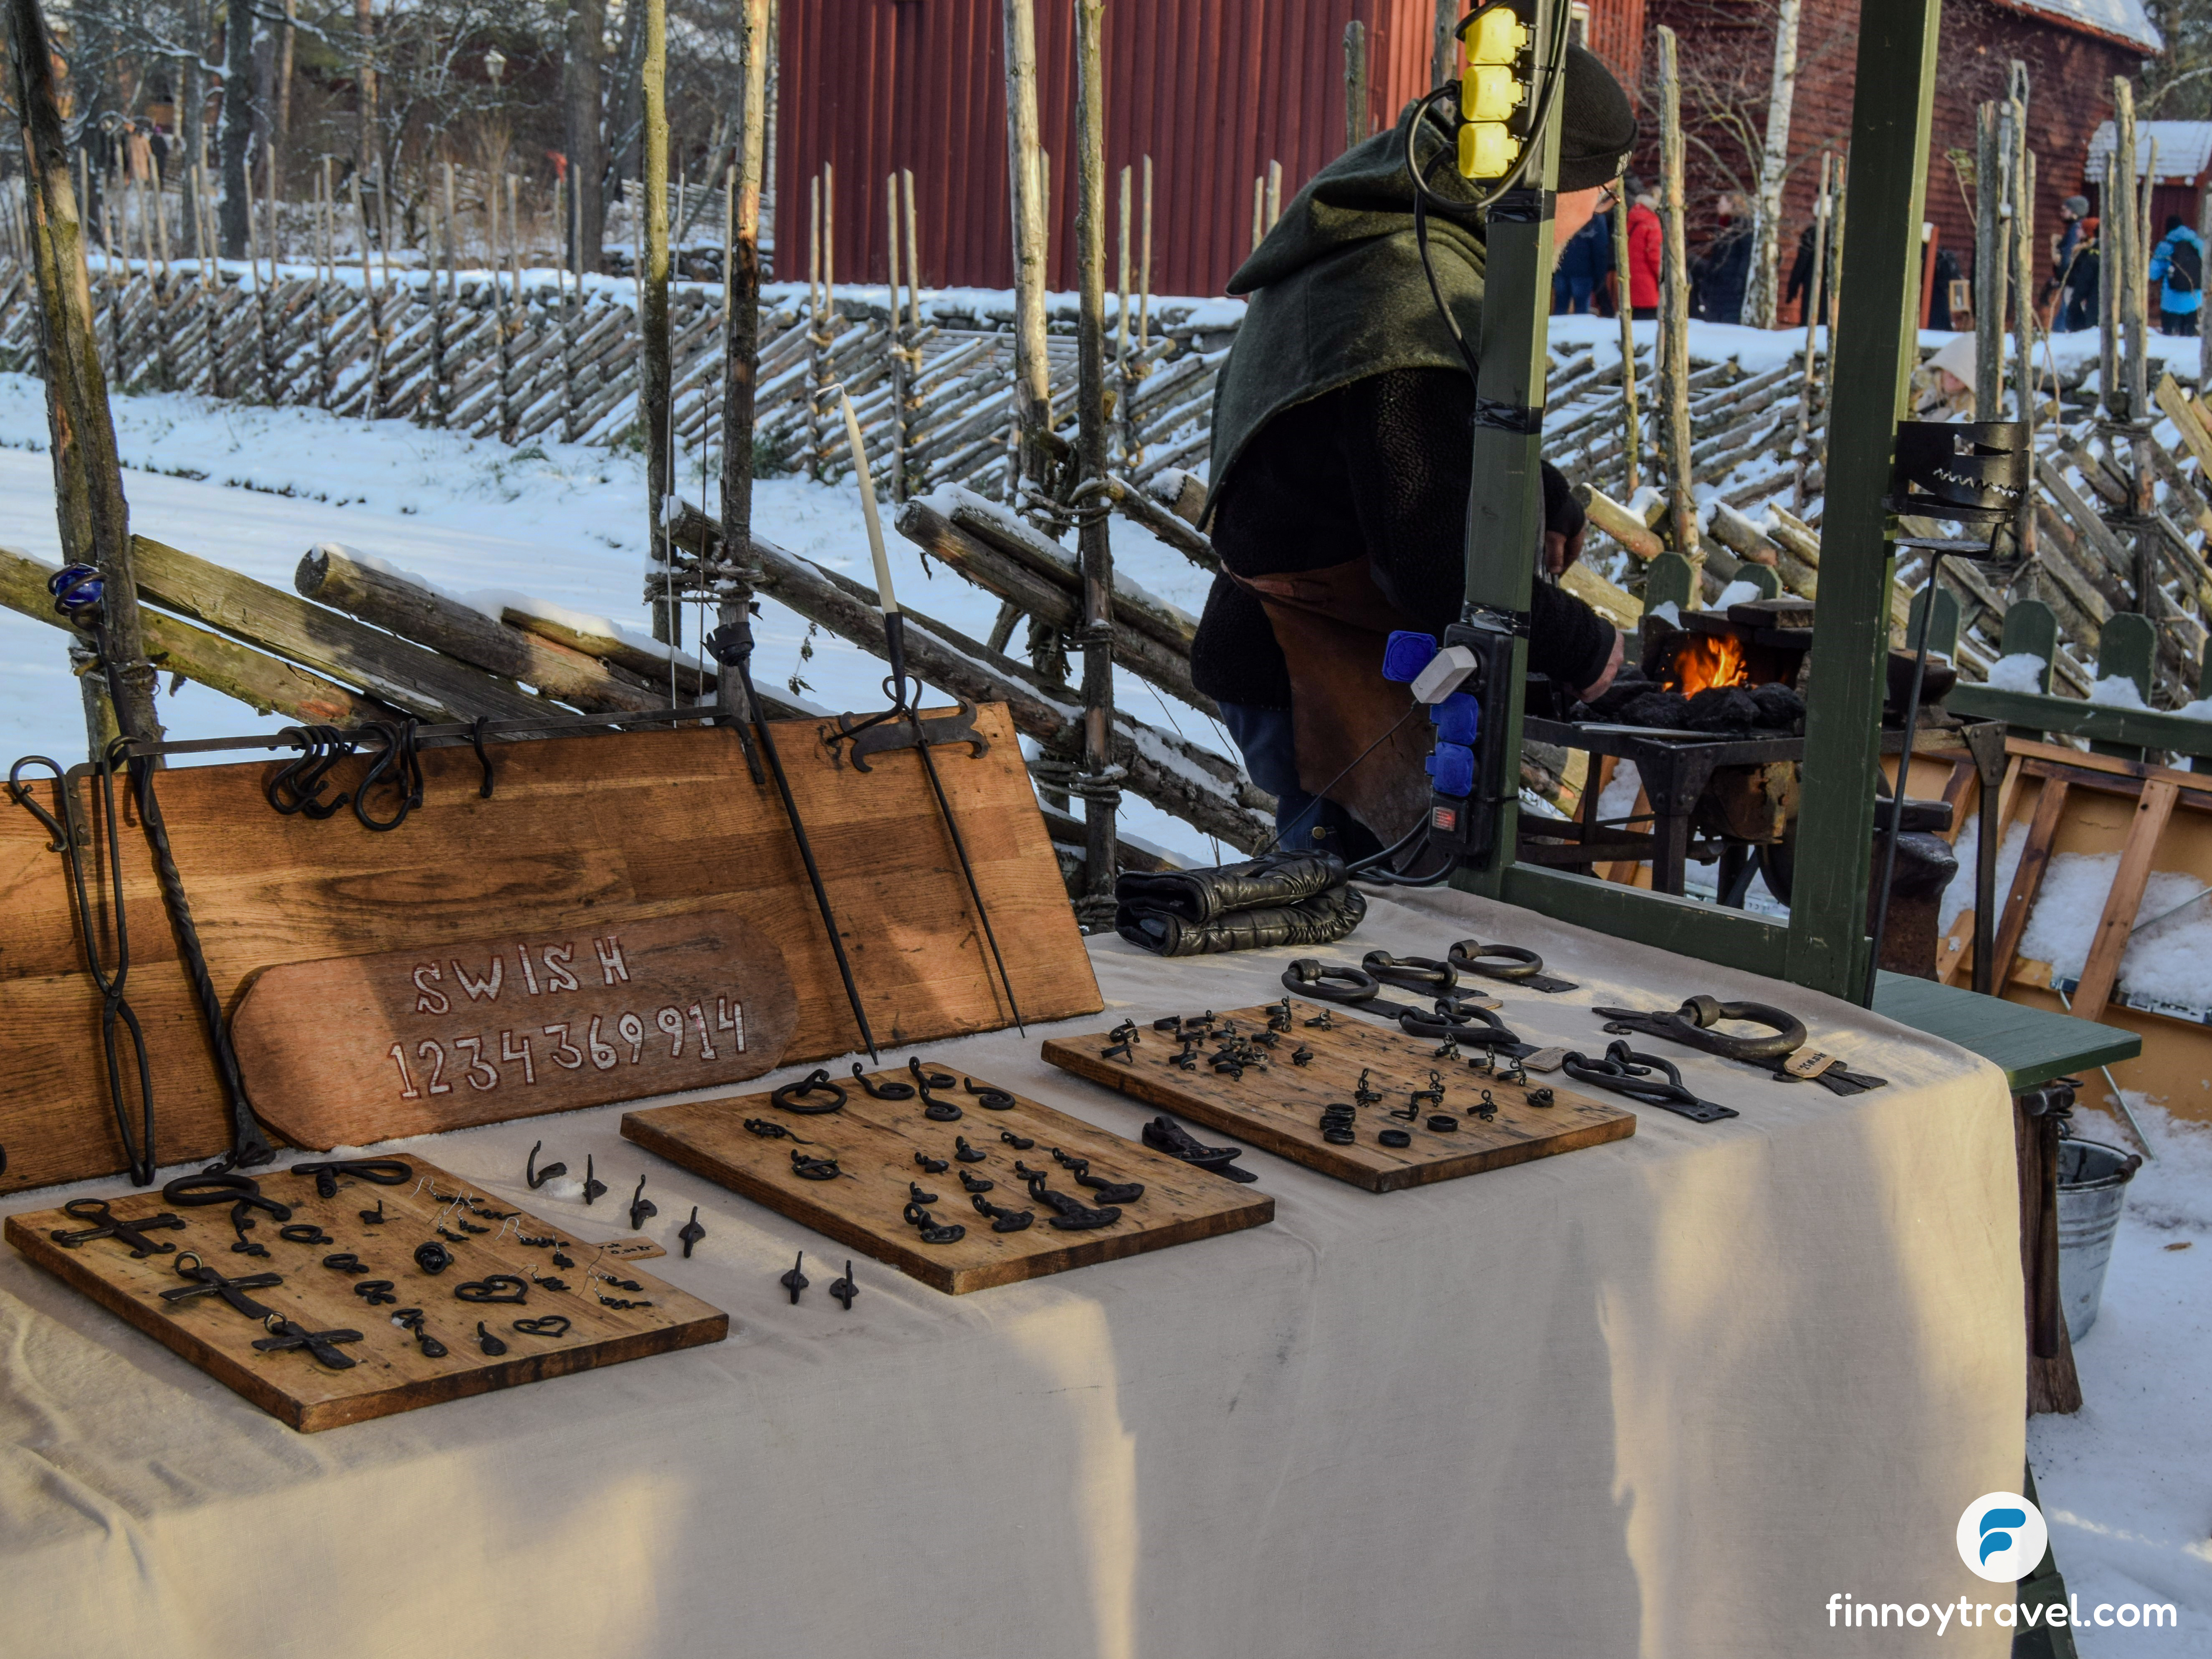 products_on_sale_made_by_Swedish_smith_Skansen_Christmas_market_Stockholm_Sweden.jpg